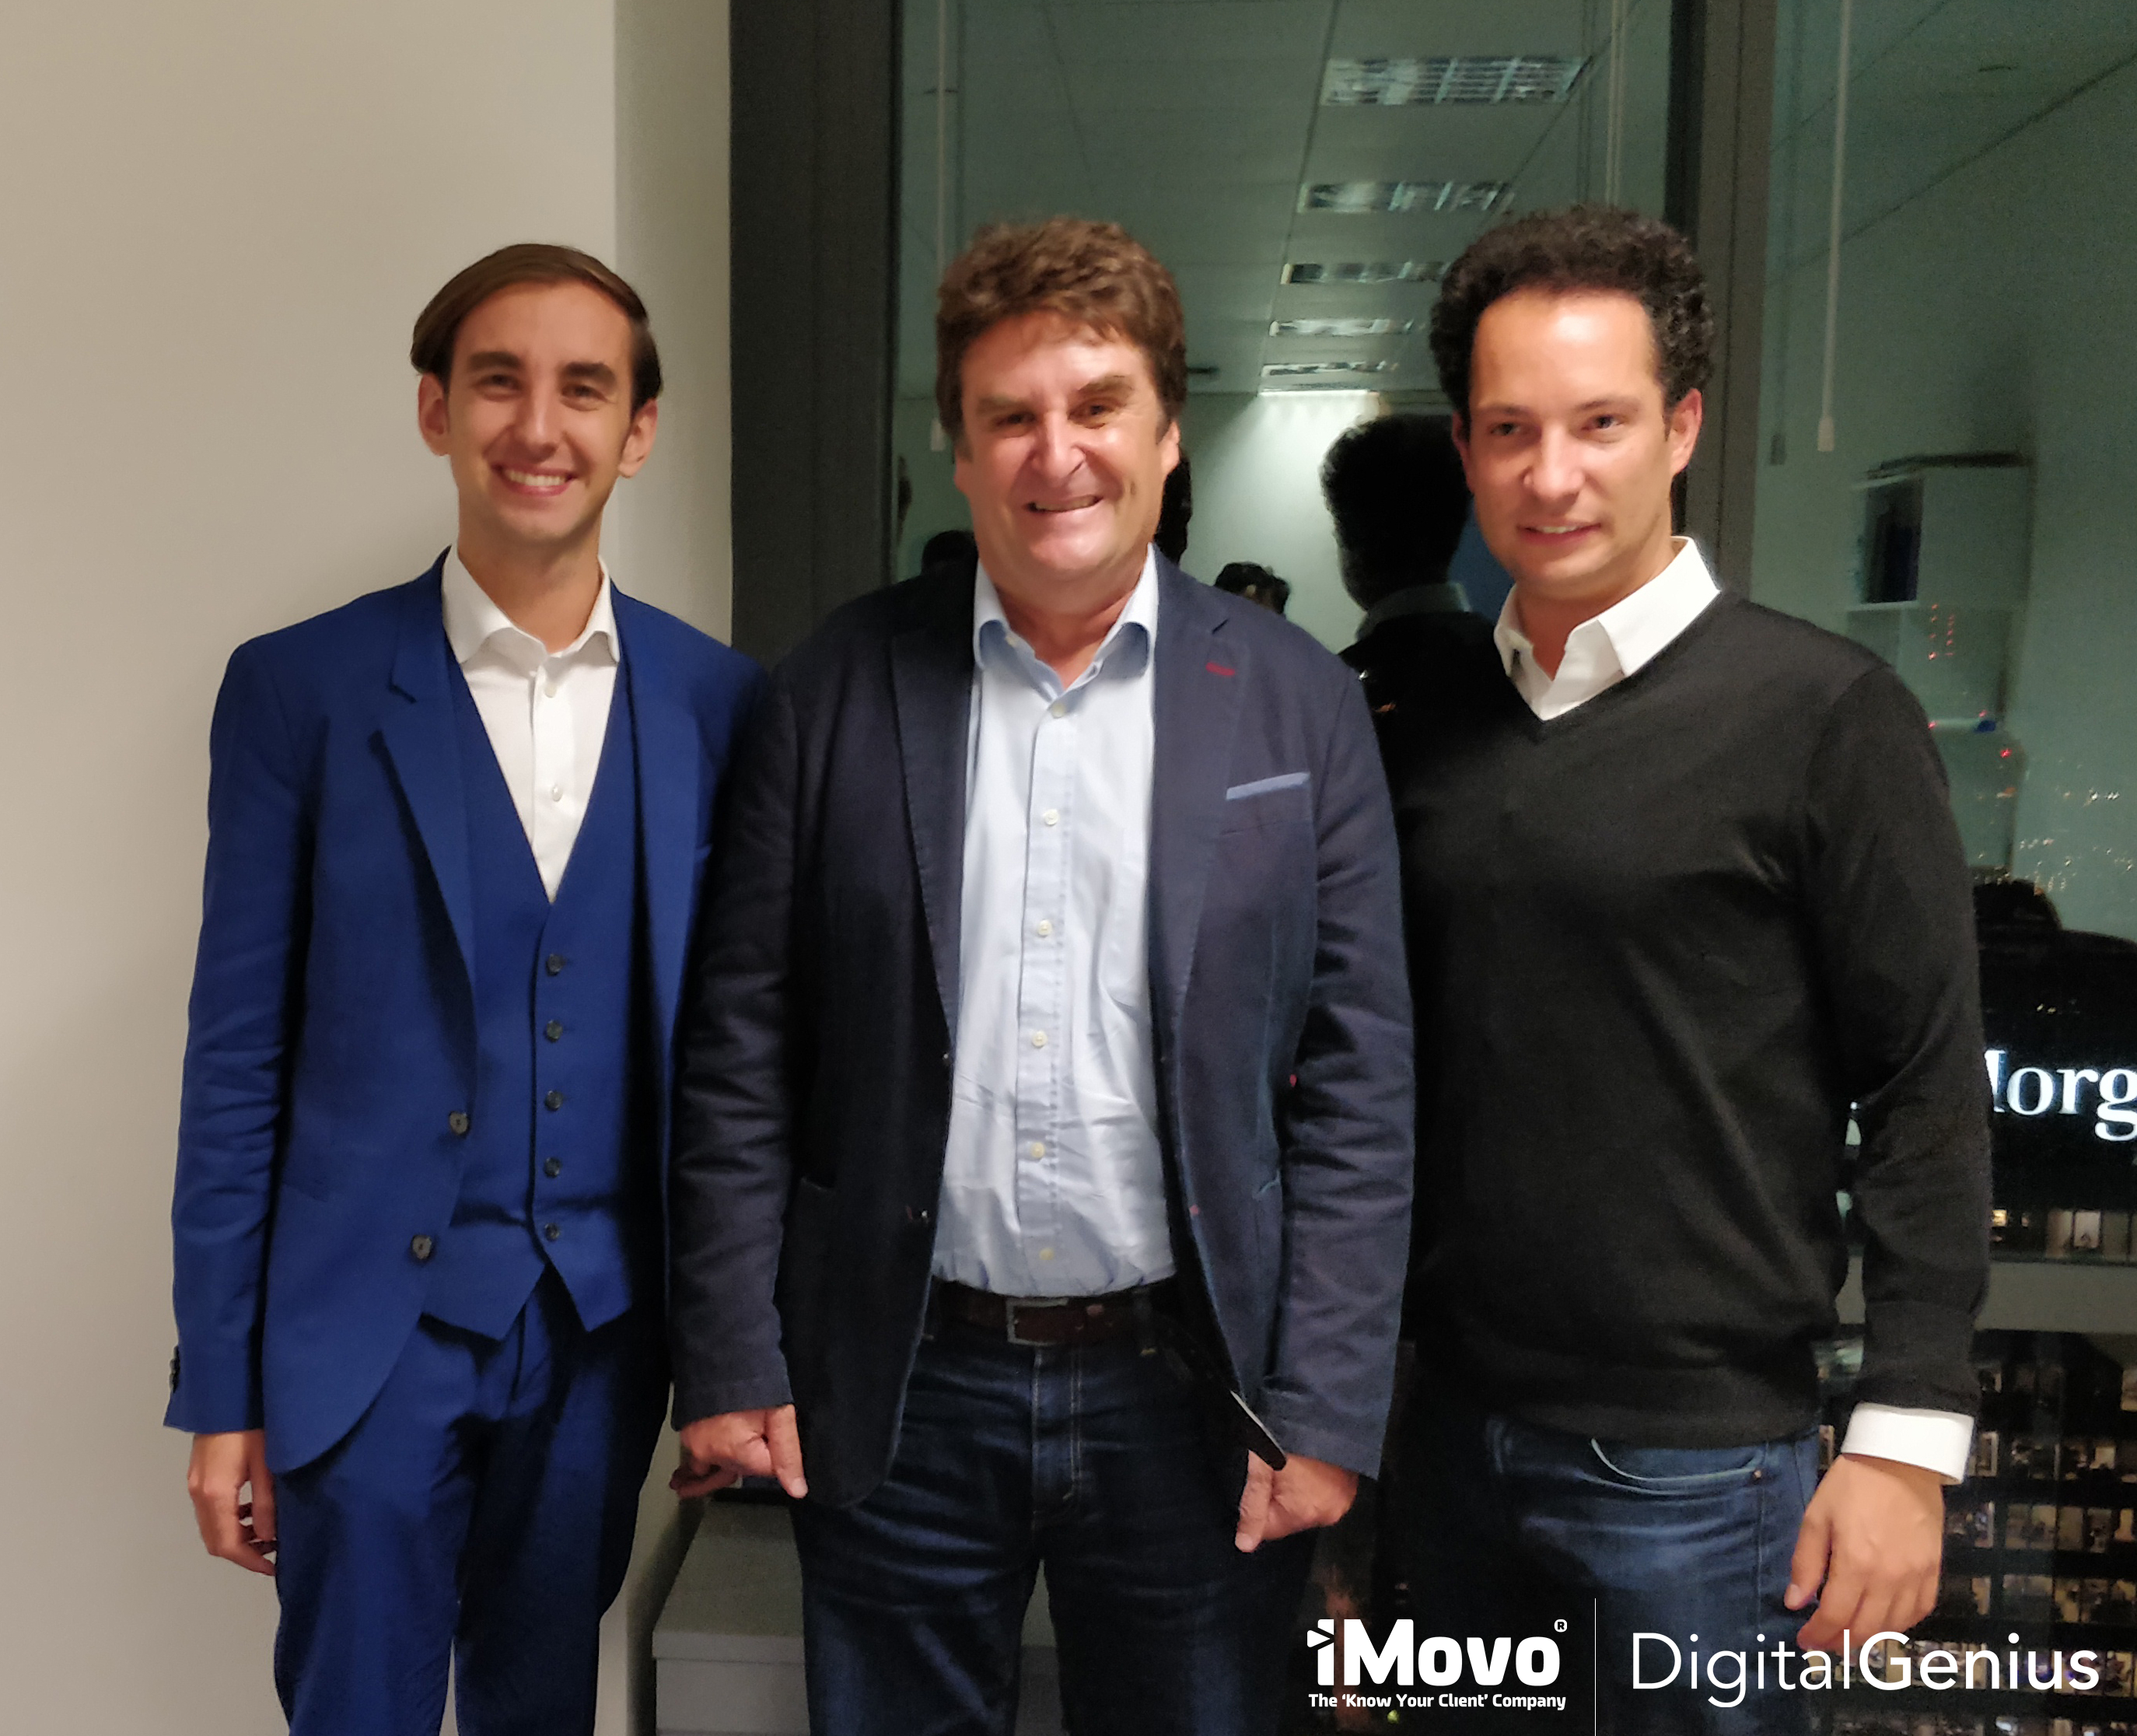 iMovo partners up with DigitalGenius - The Artificial Intelligence (AI ...